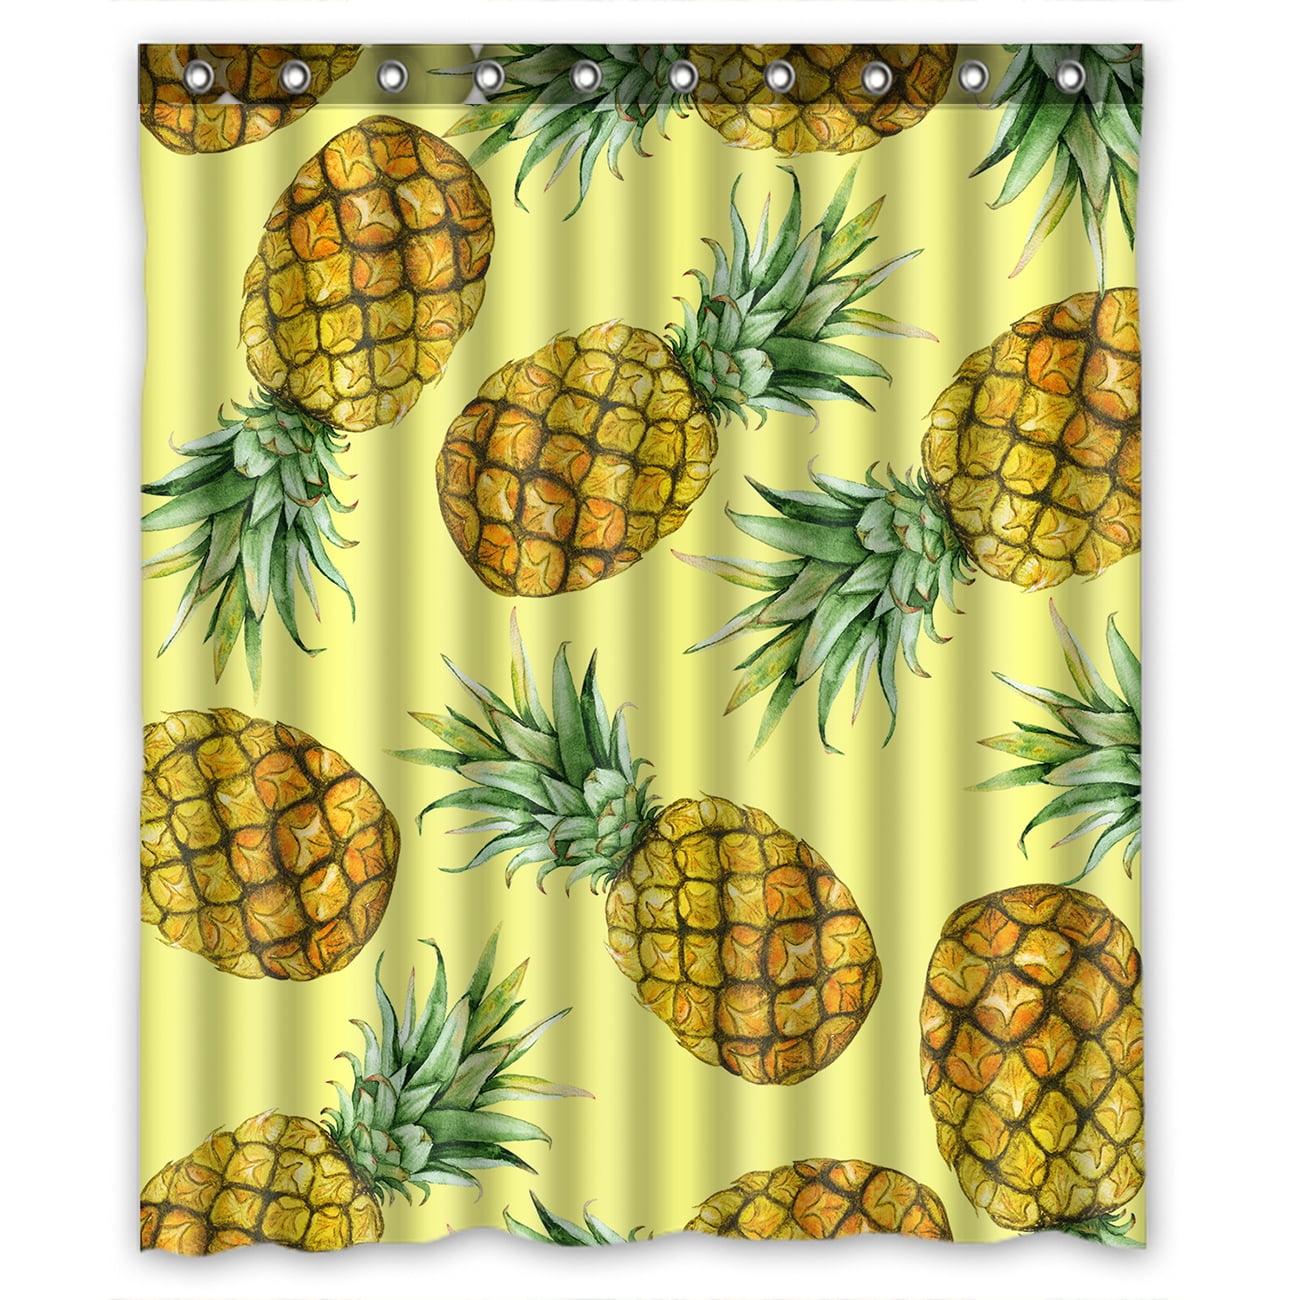 Coconut and Pineapple Flower Bathroom Fabric Shower Curtain Set 71Inches Long 